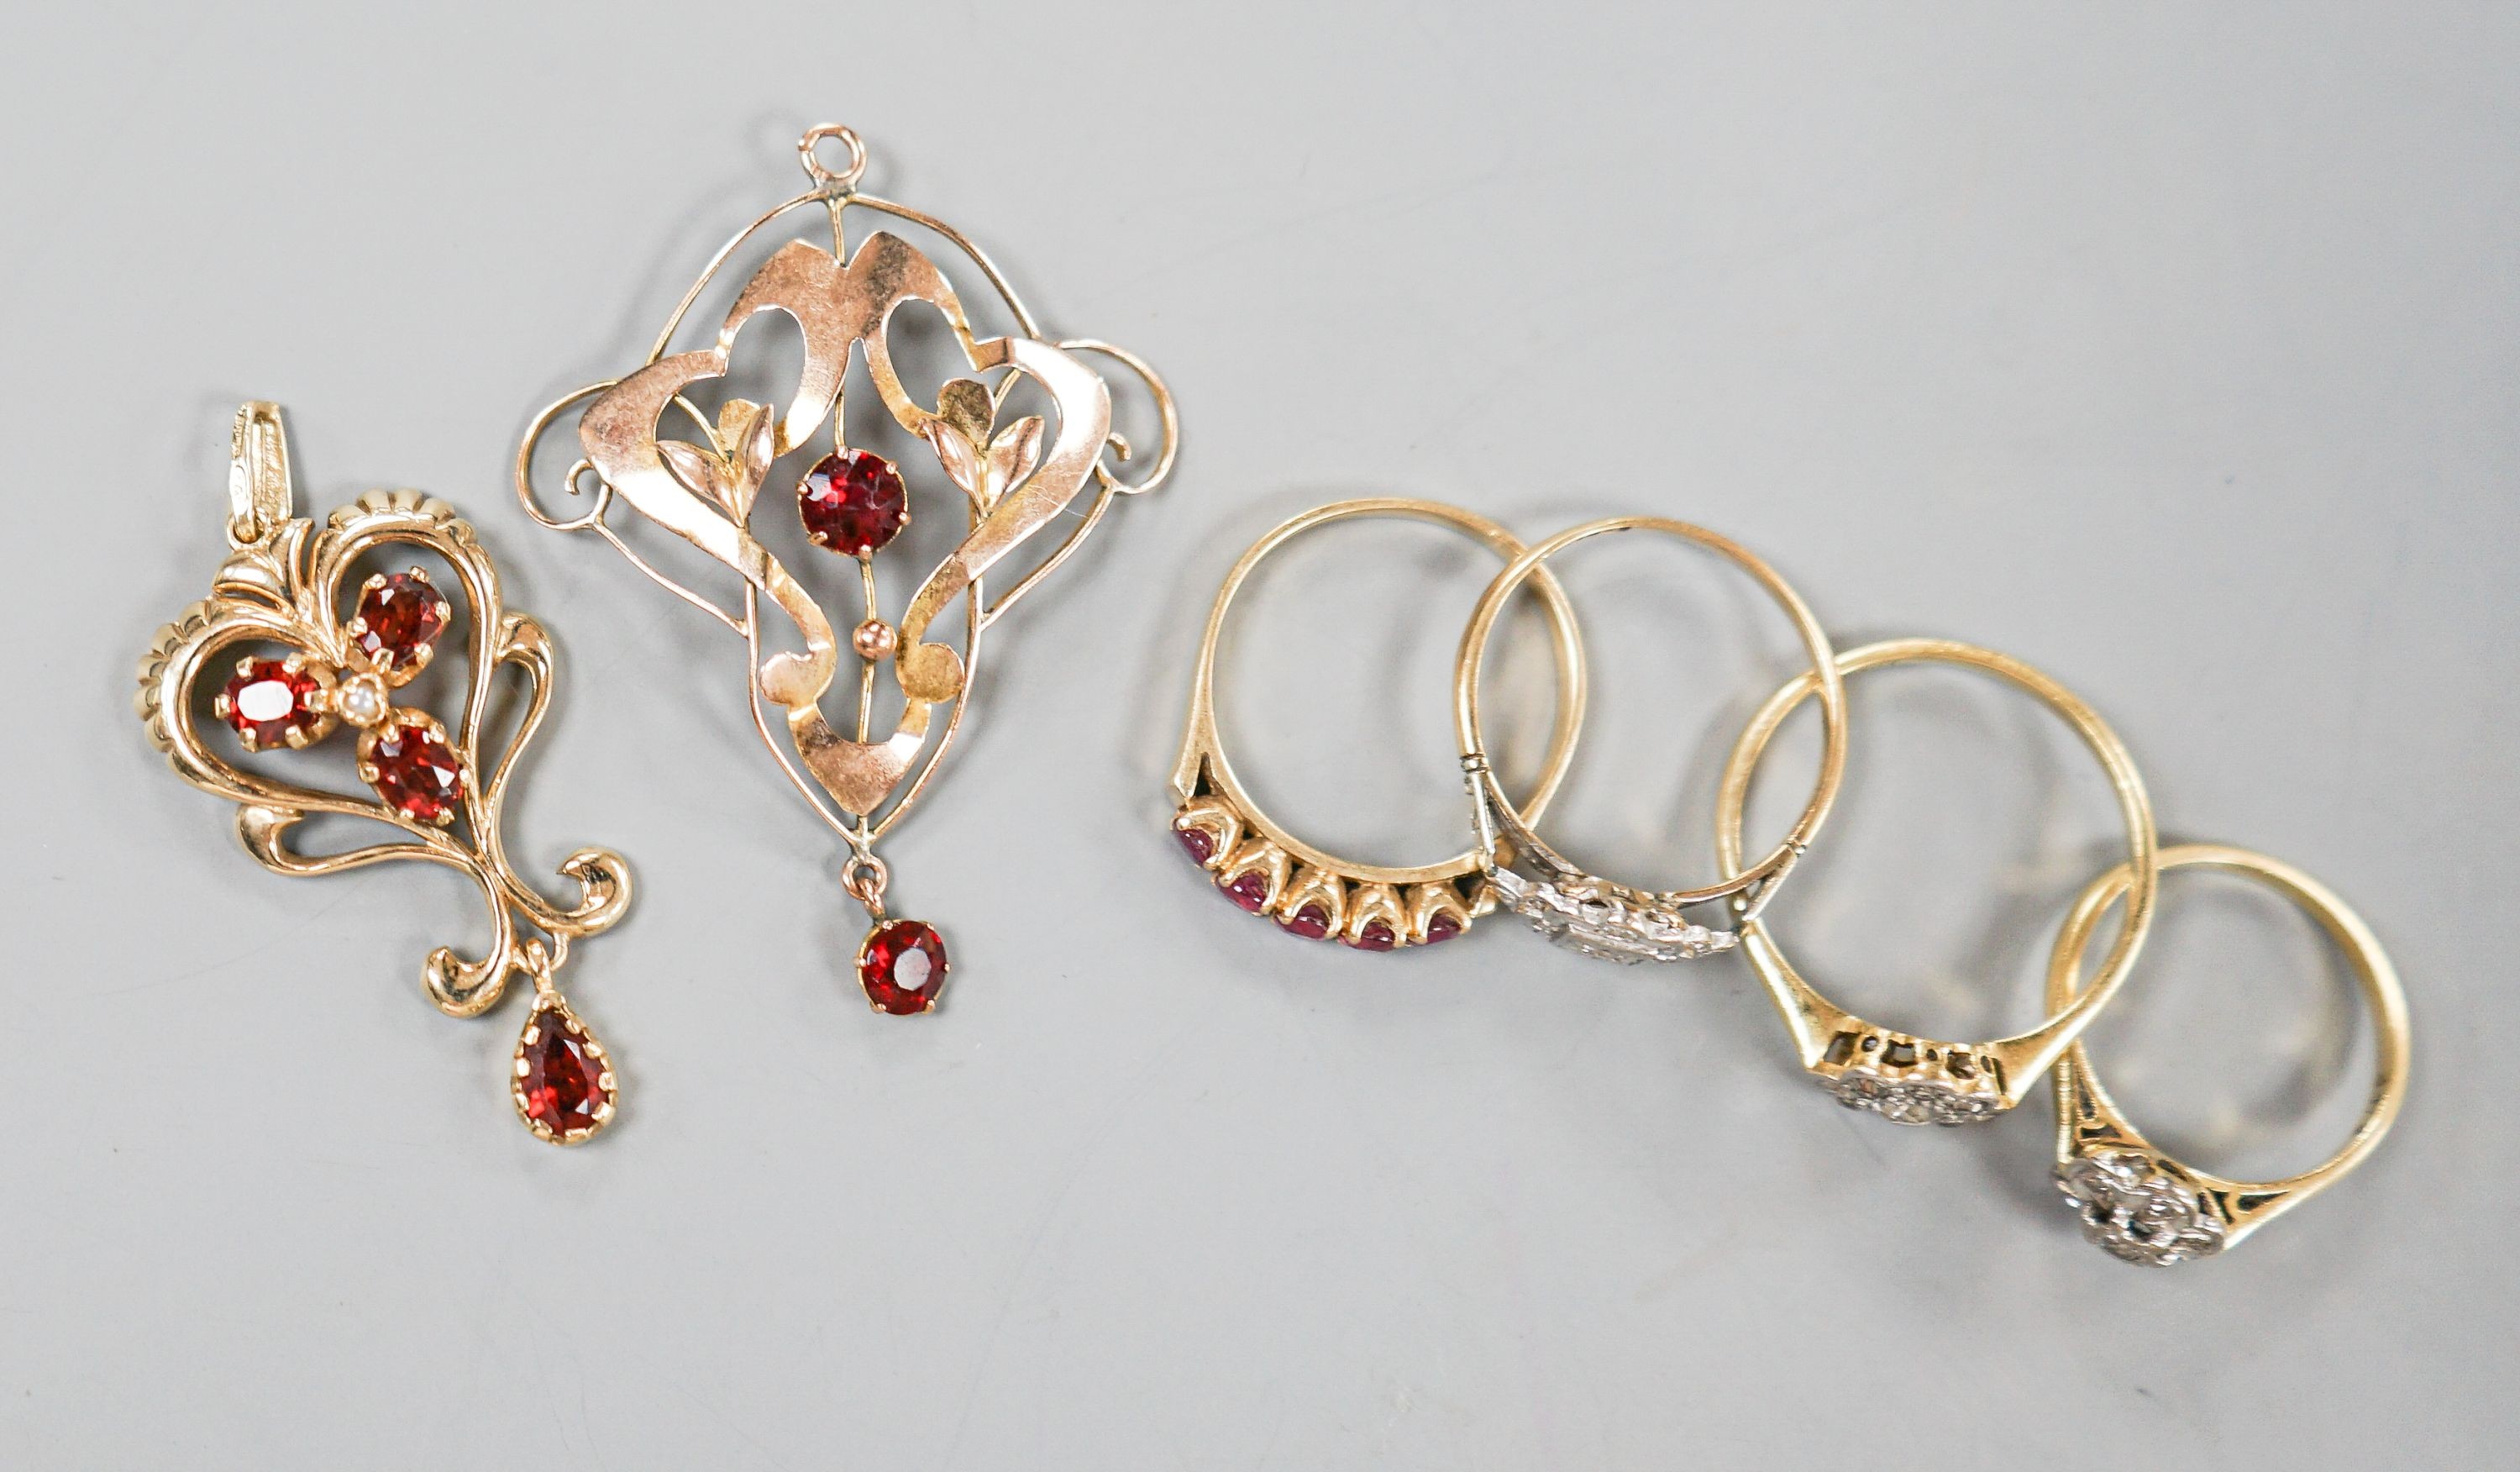 Two 18ct and diamond cluster rings, gross 5.3 grams, a 585 and diamond chip ring, gross 1.7 grams, a 9ct gold gem set ring and two 9ct pendants, gross 8.9 grams.